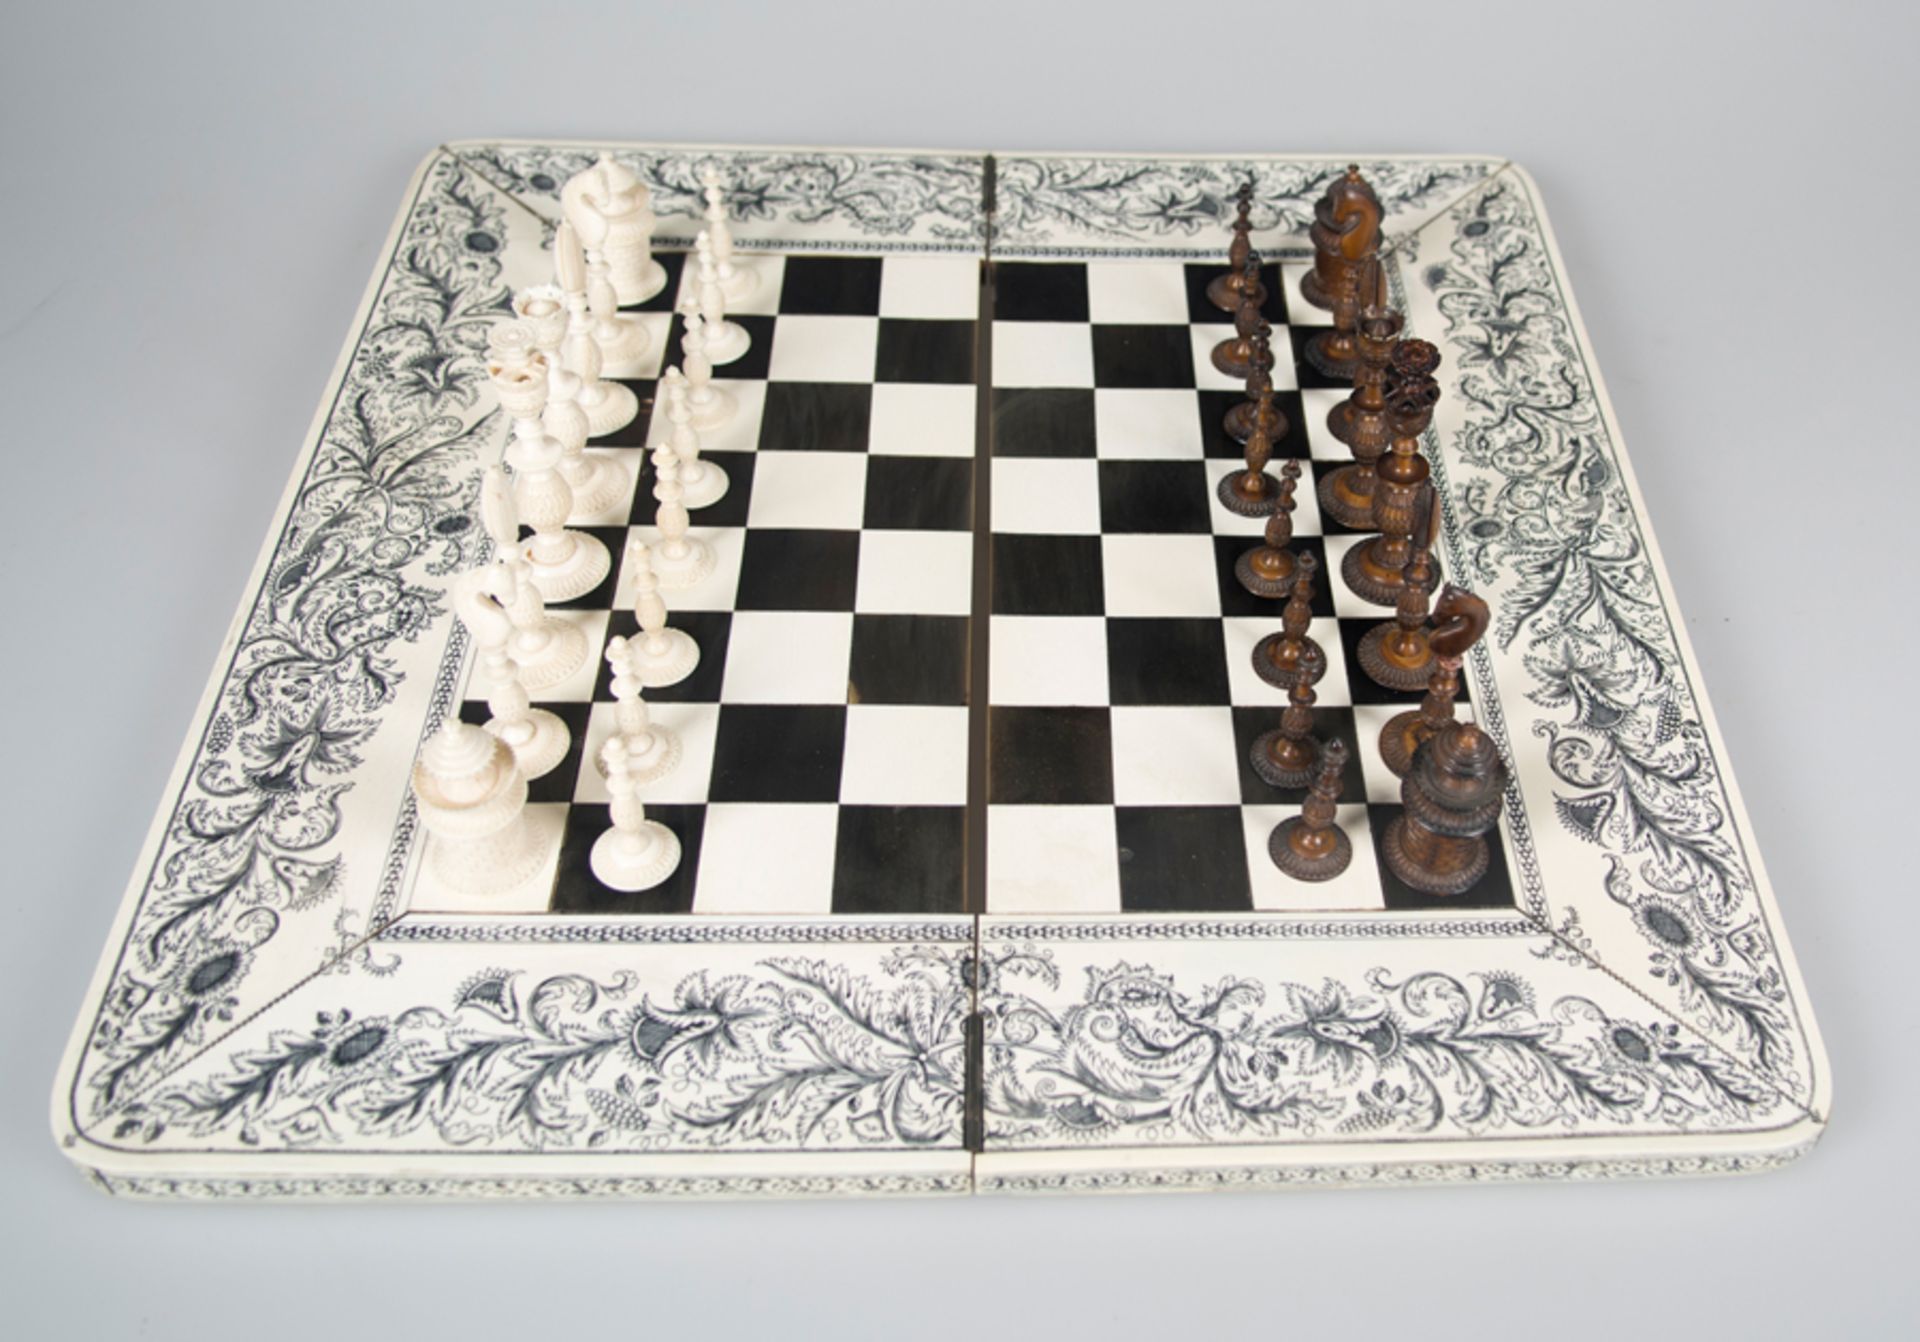 Complete chess set in wood, stained ivory and in its color. Anglo-Indian School. Circa 1850. - Bild 4 aus 8